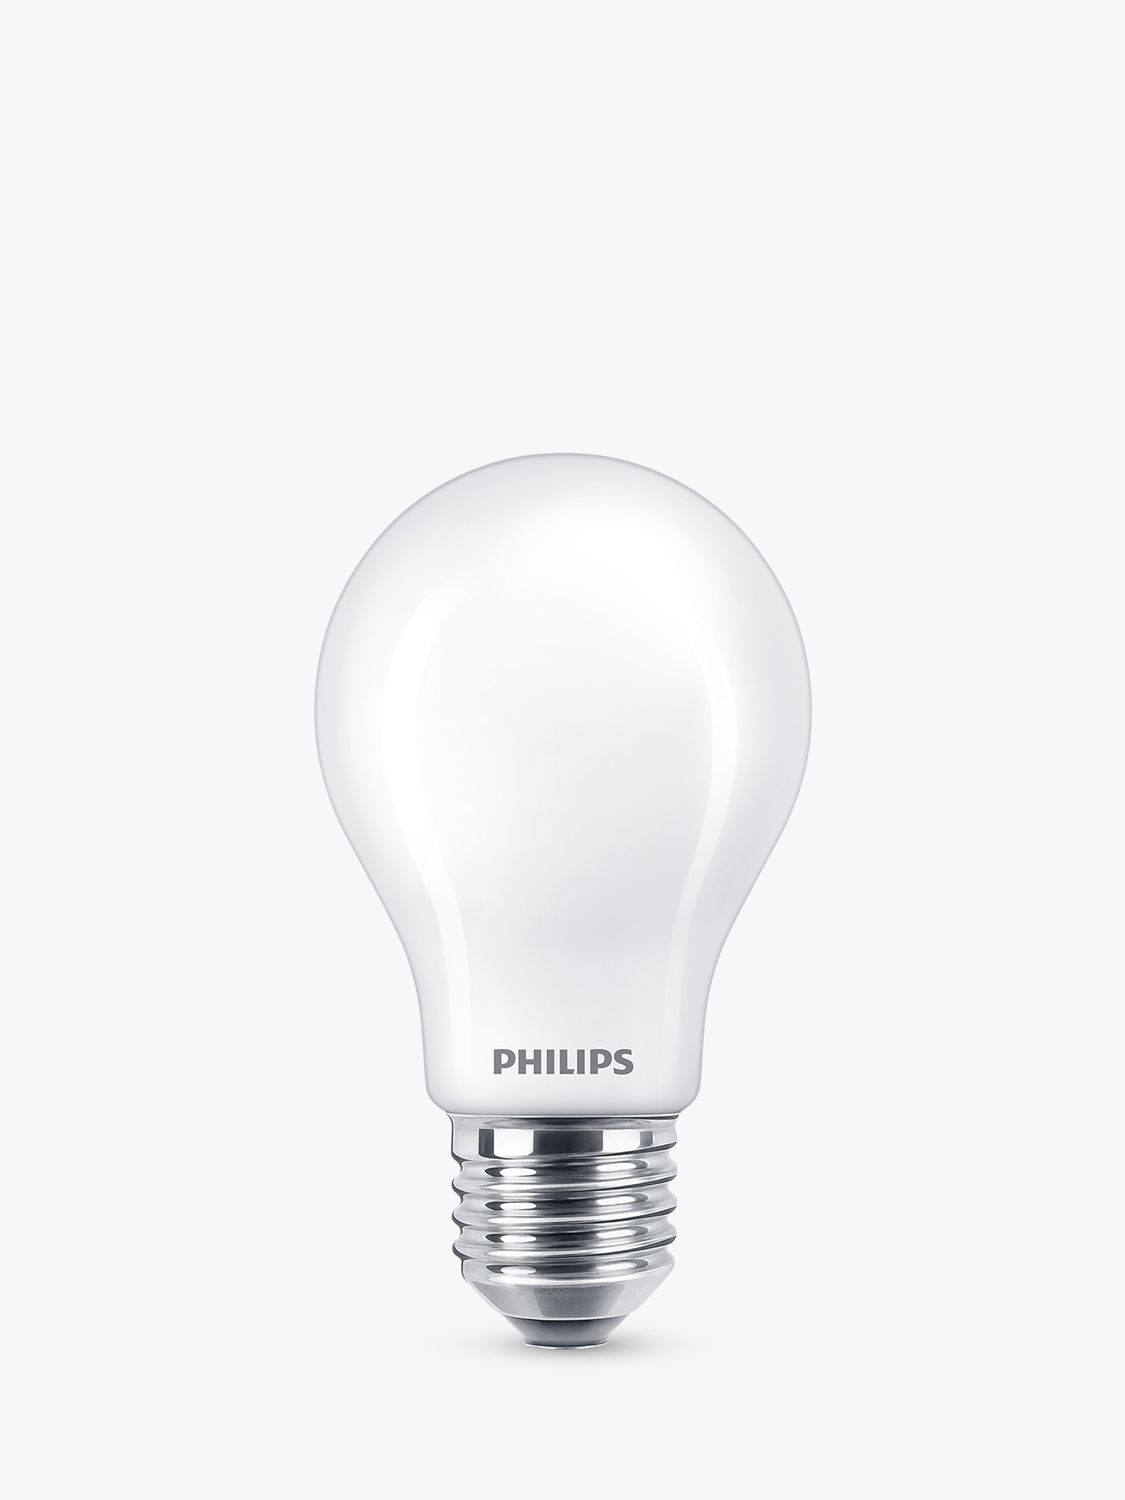 Photo of Philips 10.5w a60 es led non dimmable classic bulb cool white